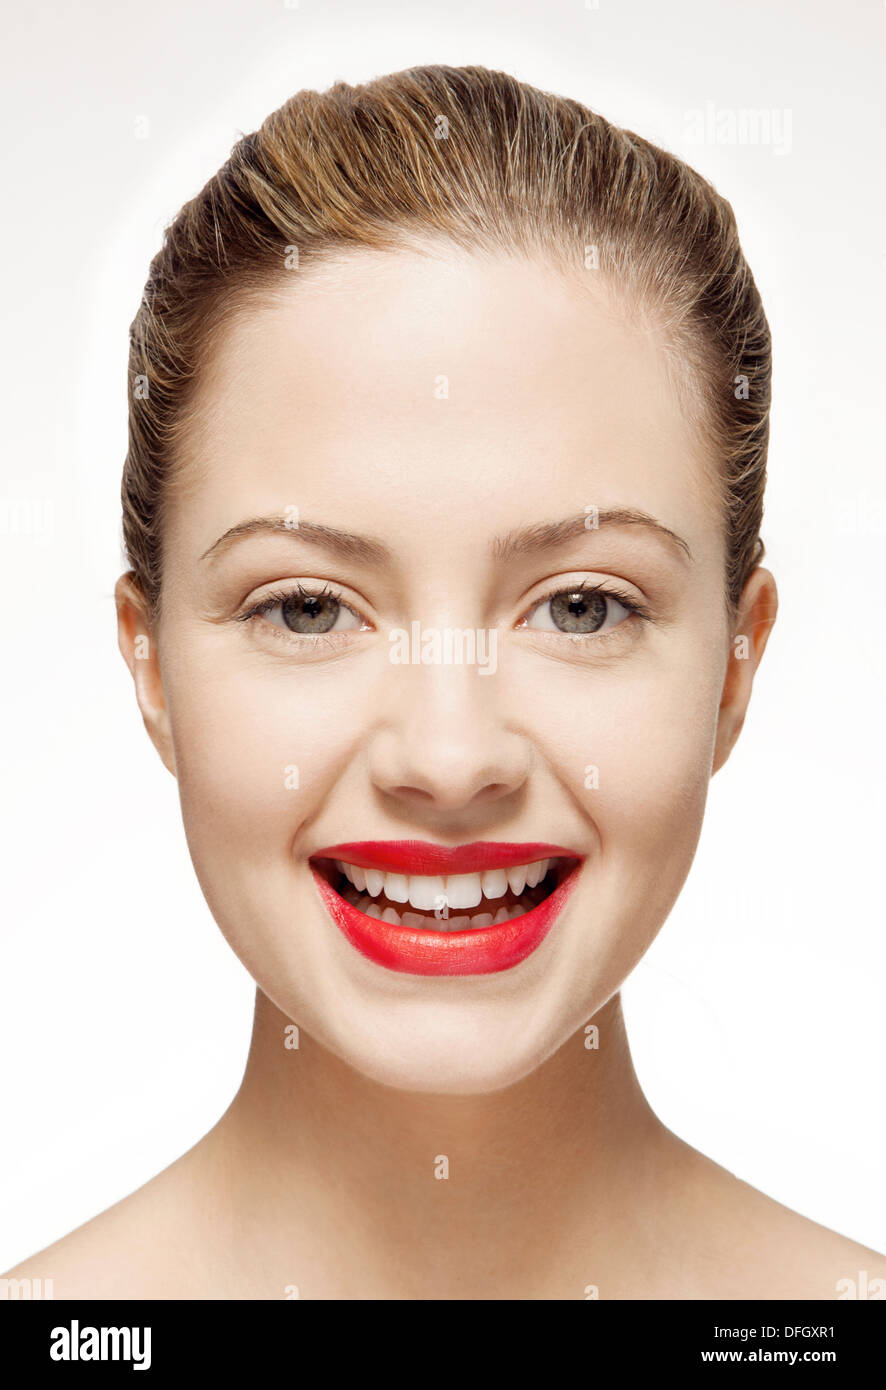 Smiling woman wearing red lipstick Banque D'Images